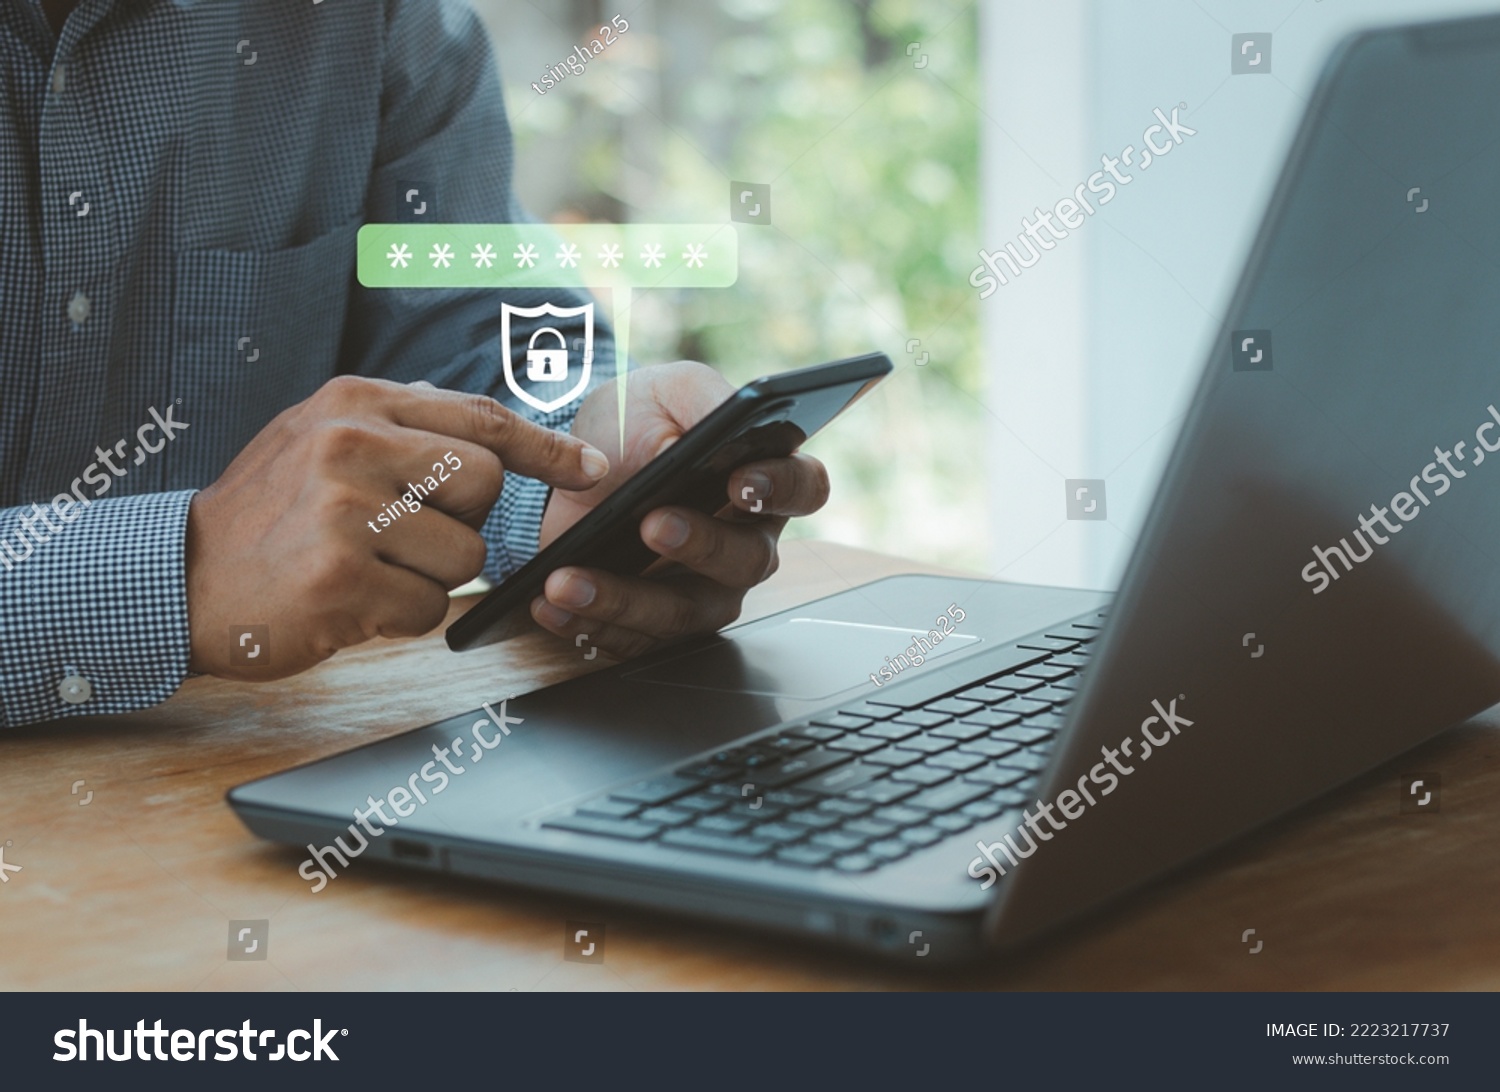 Two factor authentication concept. cyber security with biometrics authentication technology. Virtual safety shield icon while access on phone with laptop for validate password, Identity verification. #2223217737